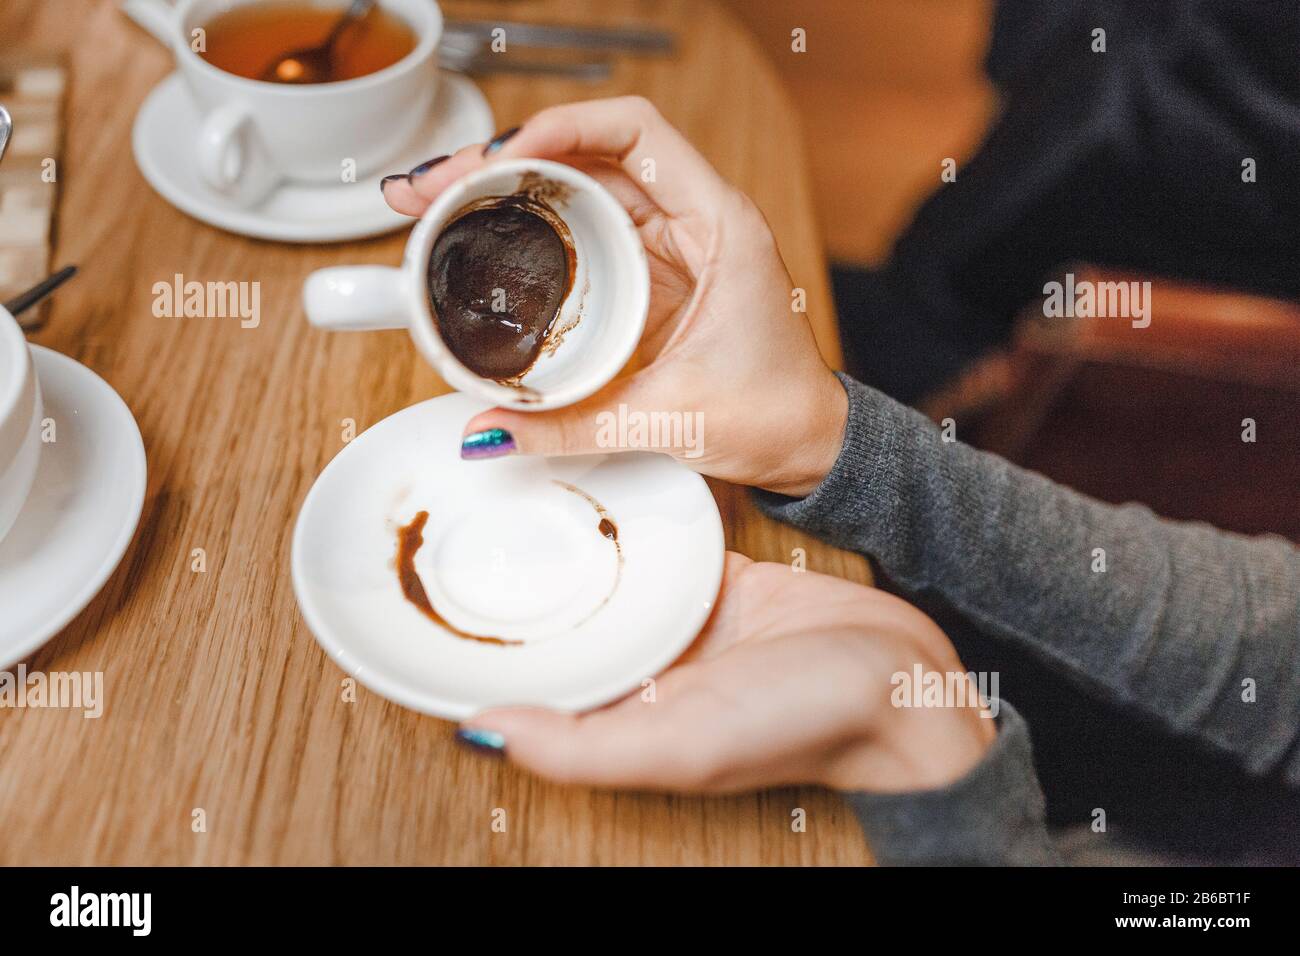 woman guessing on the coffee grounds in restaurant, concept of divination and fortune telling Stock Photo